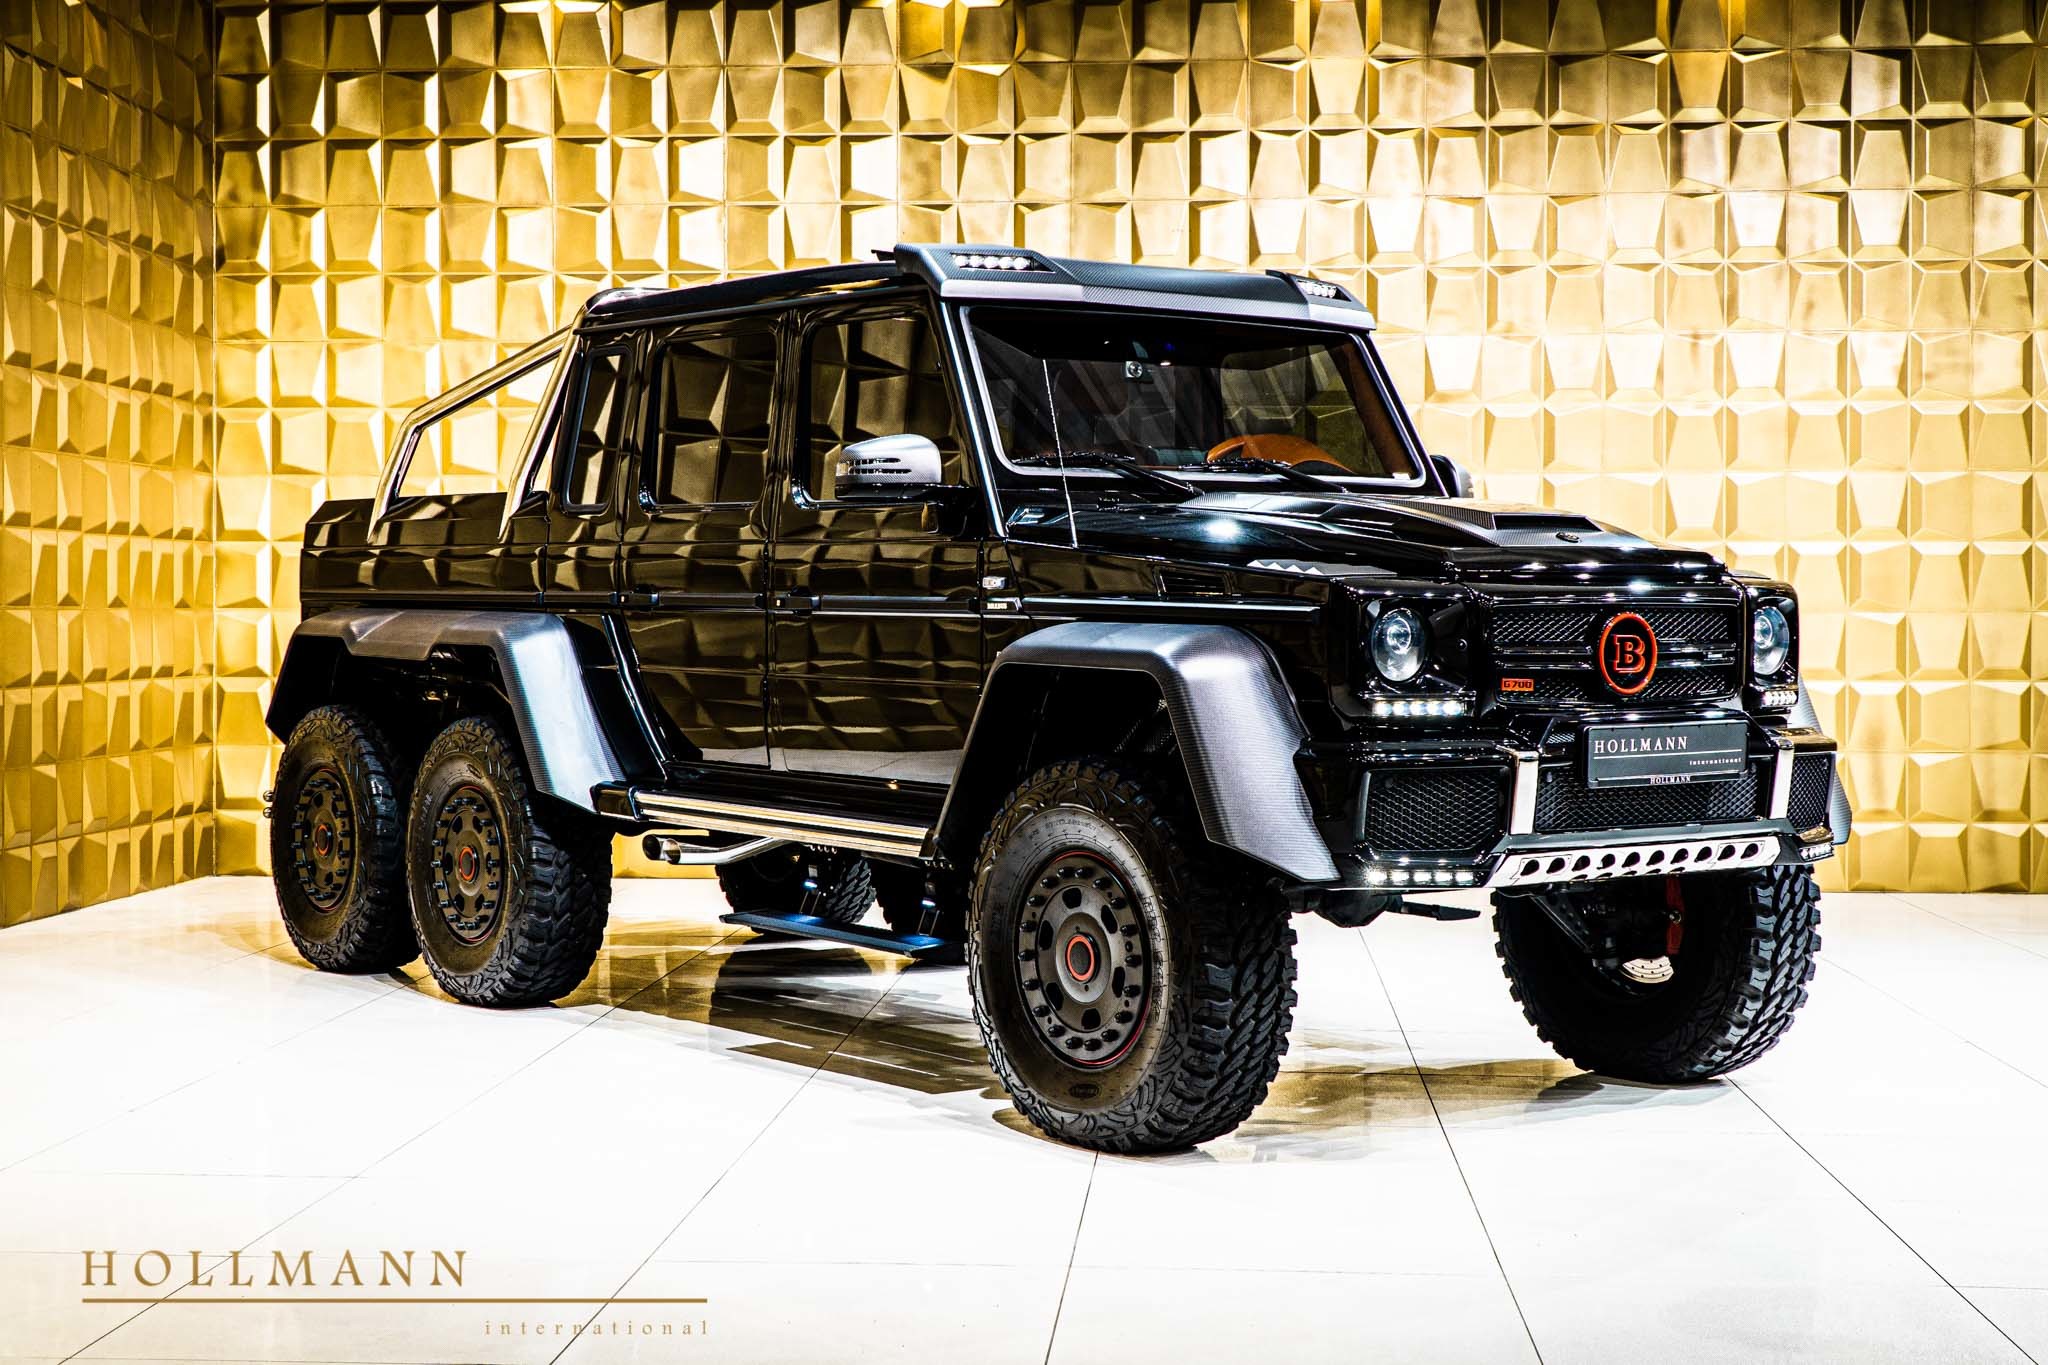 Mercedes Benz G63 Amg 6x6 By Brabus Has 700 Hp 1 Million Price Carscoops